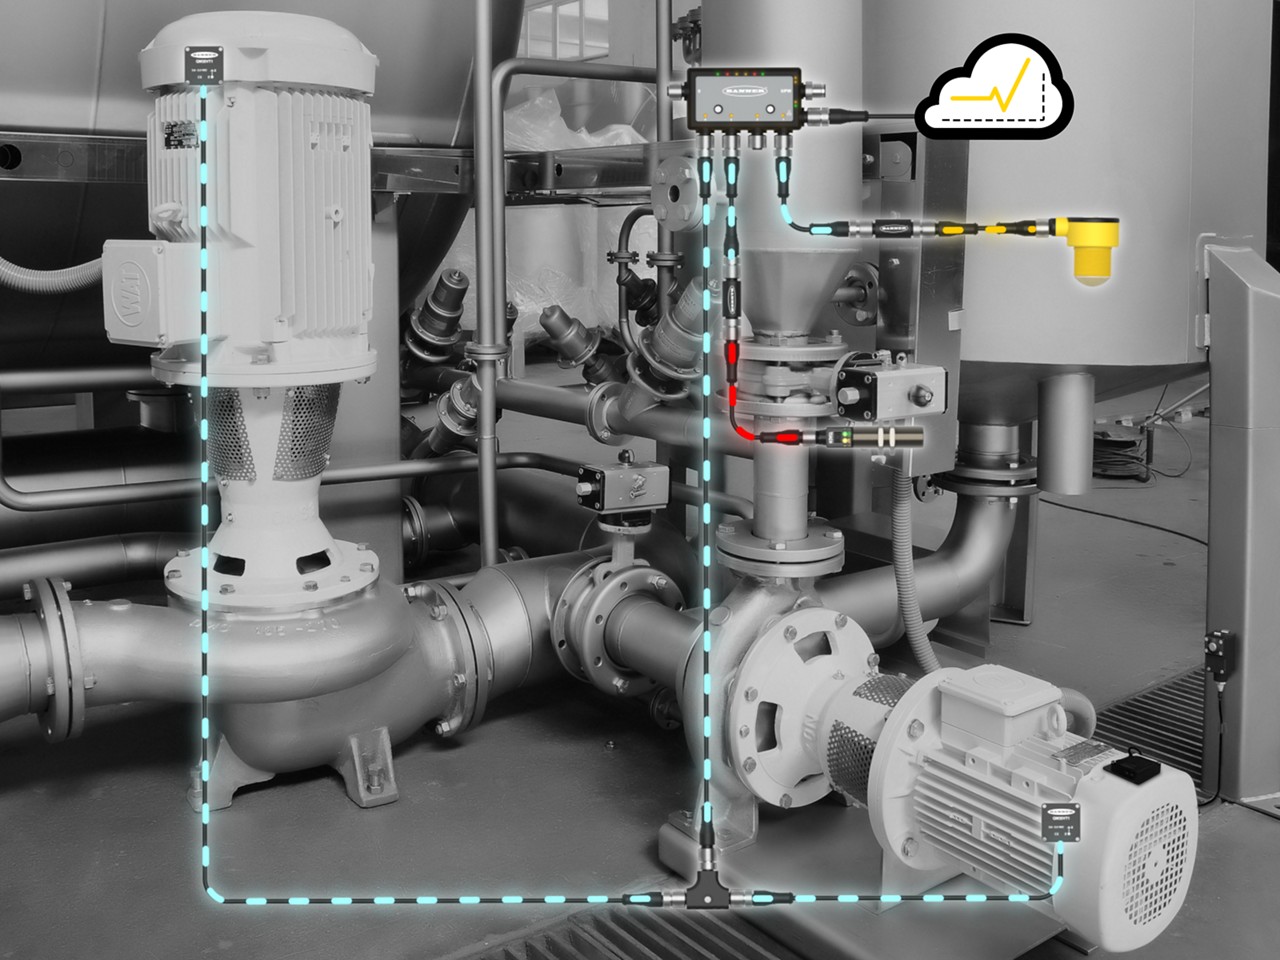 Bring IIoT to your Industrial Equipment with Ease